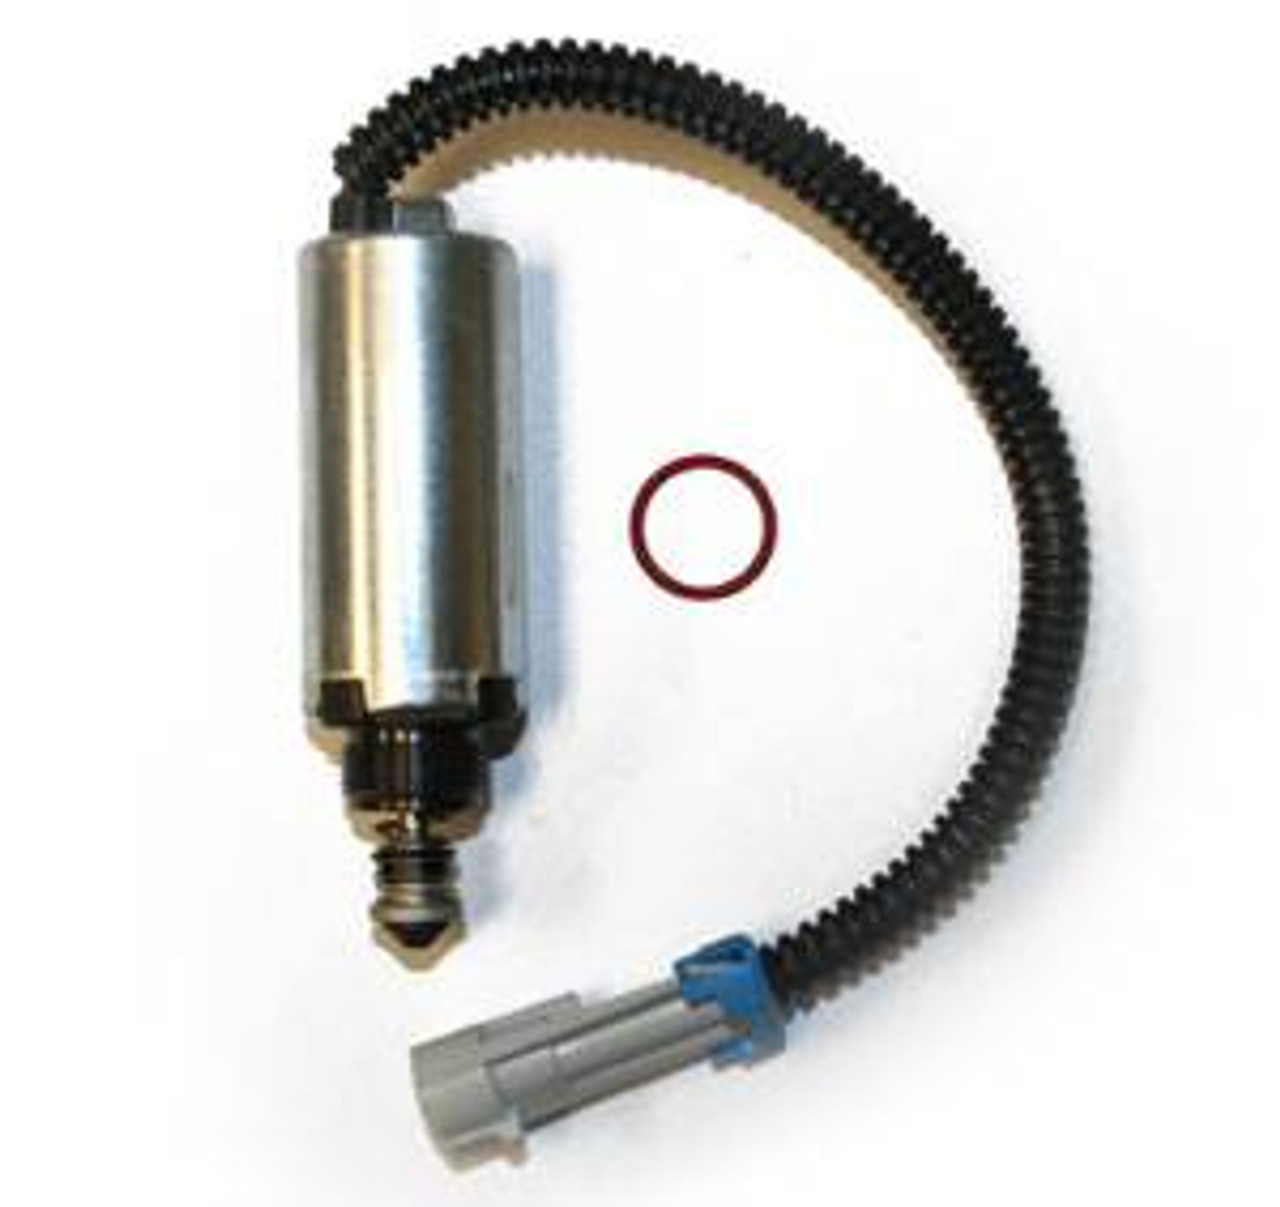 Info: - 6.5 TD Injection pump removal/installation guide with pictures.